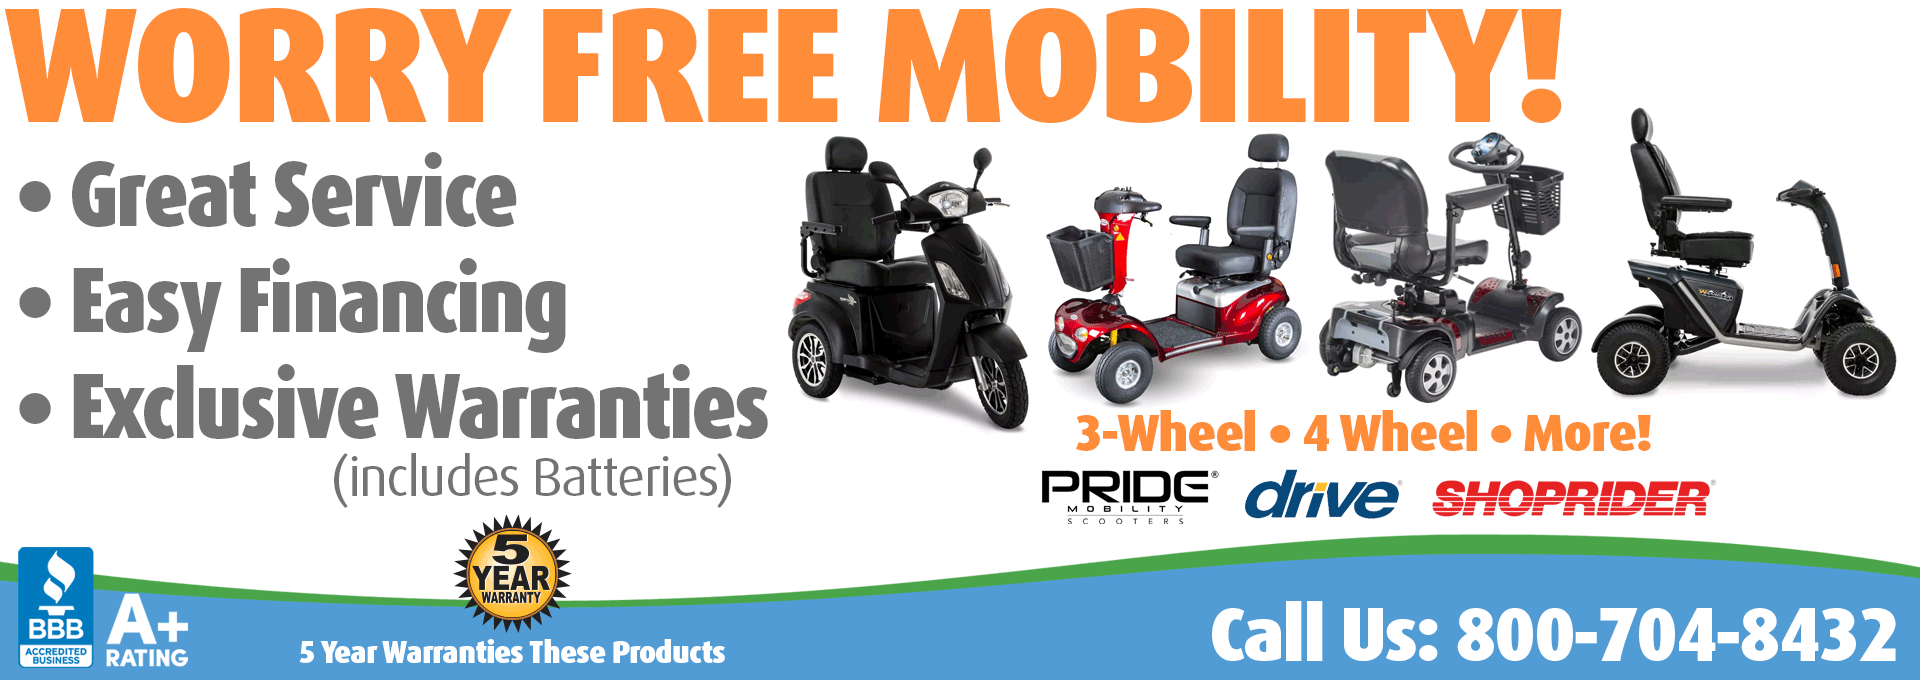 Living Well Stores: Heavy Duty, High weight capacity Mobility Scooters with Worry Free Warranties, from Drive Medical, Pride Mobility, Shoprider and More.